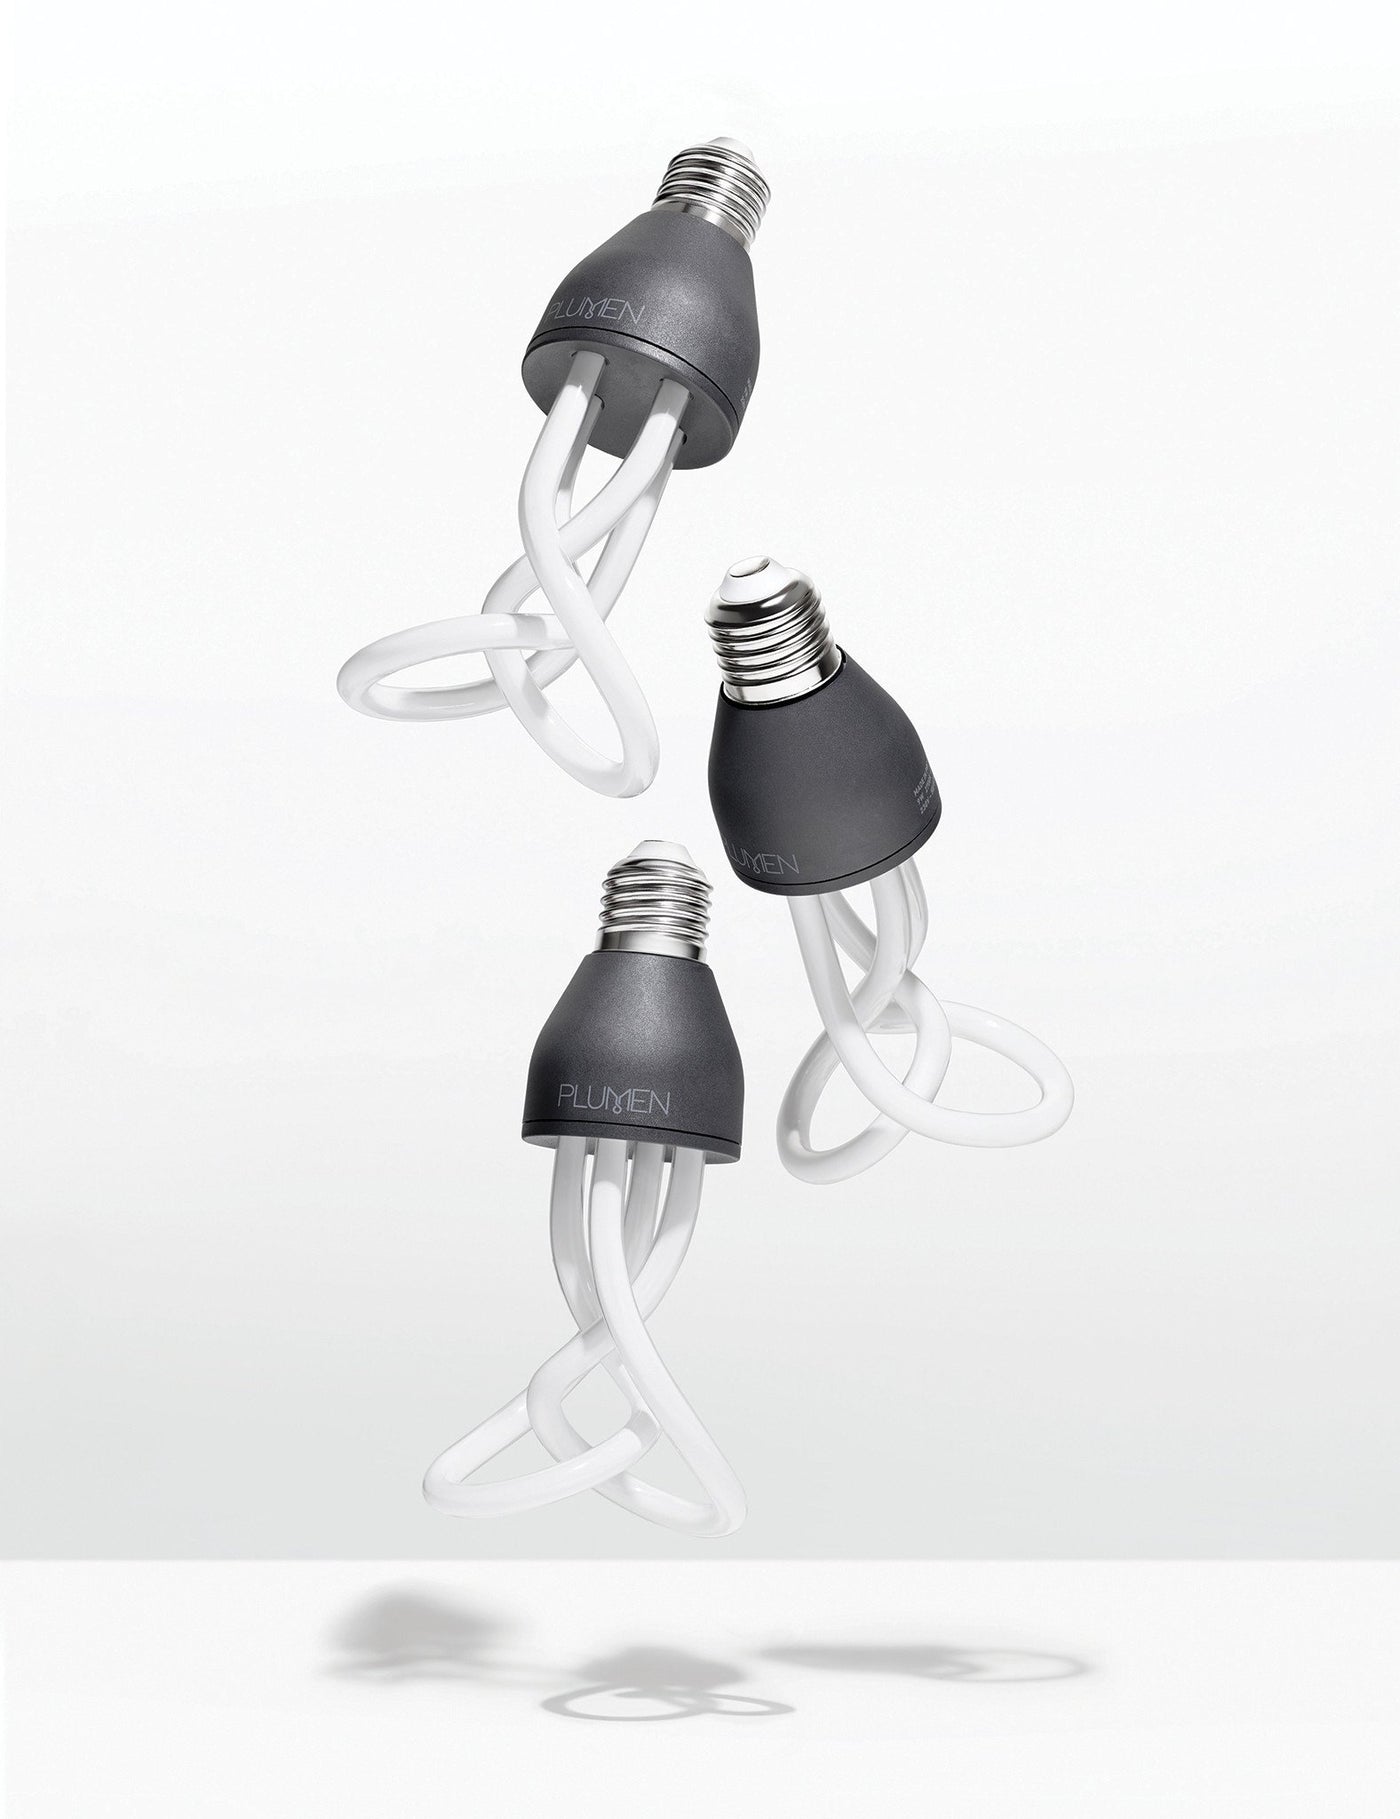 Shine A Light Shade with Baby Plumen 001 Bulb